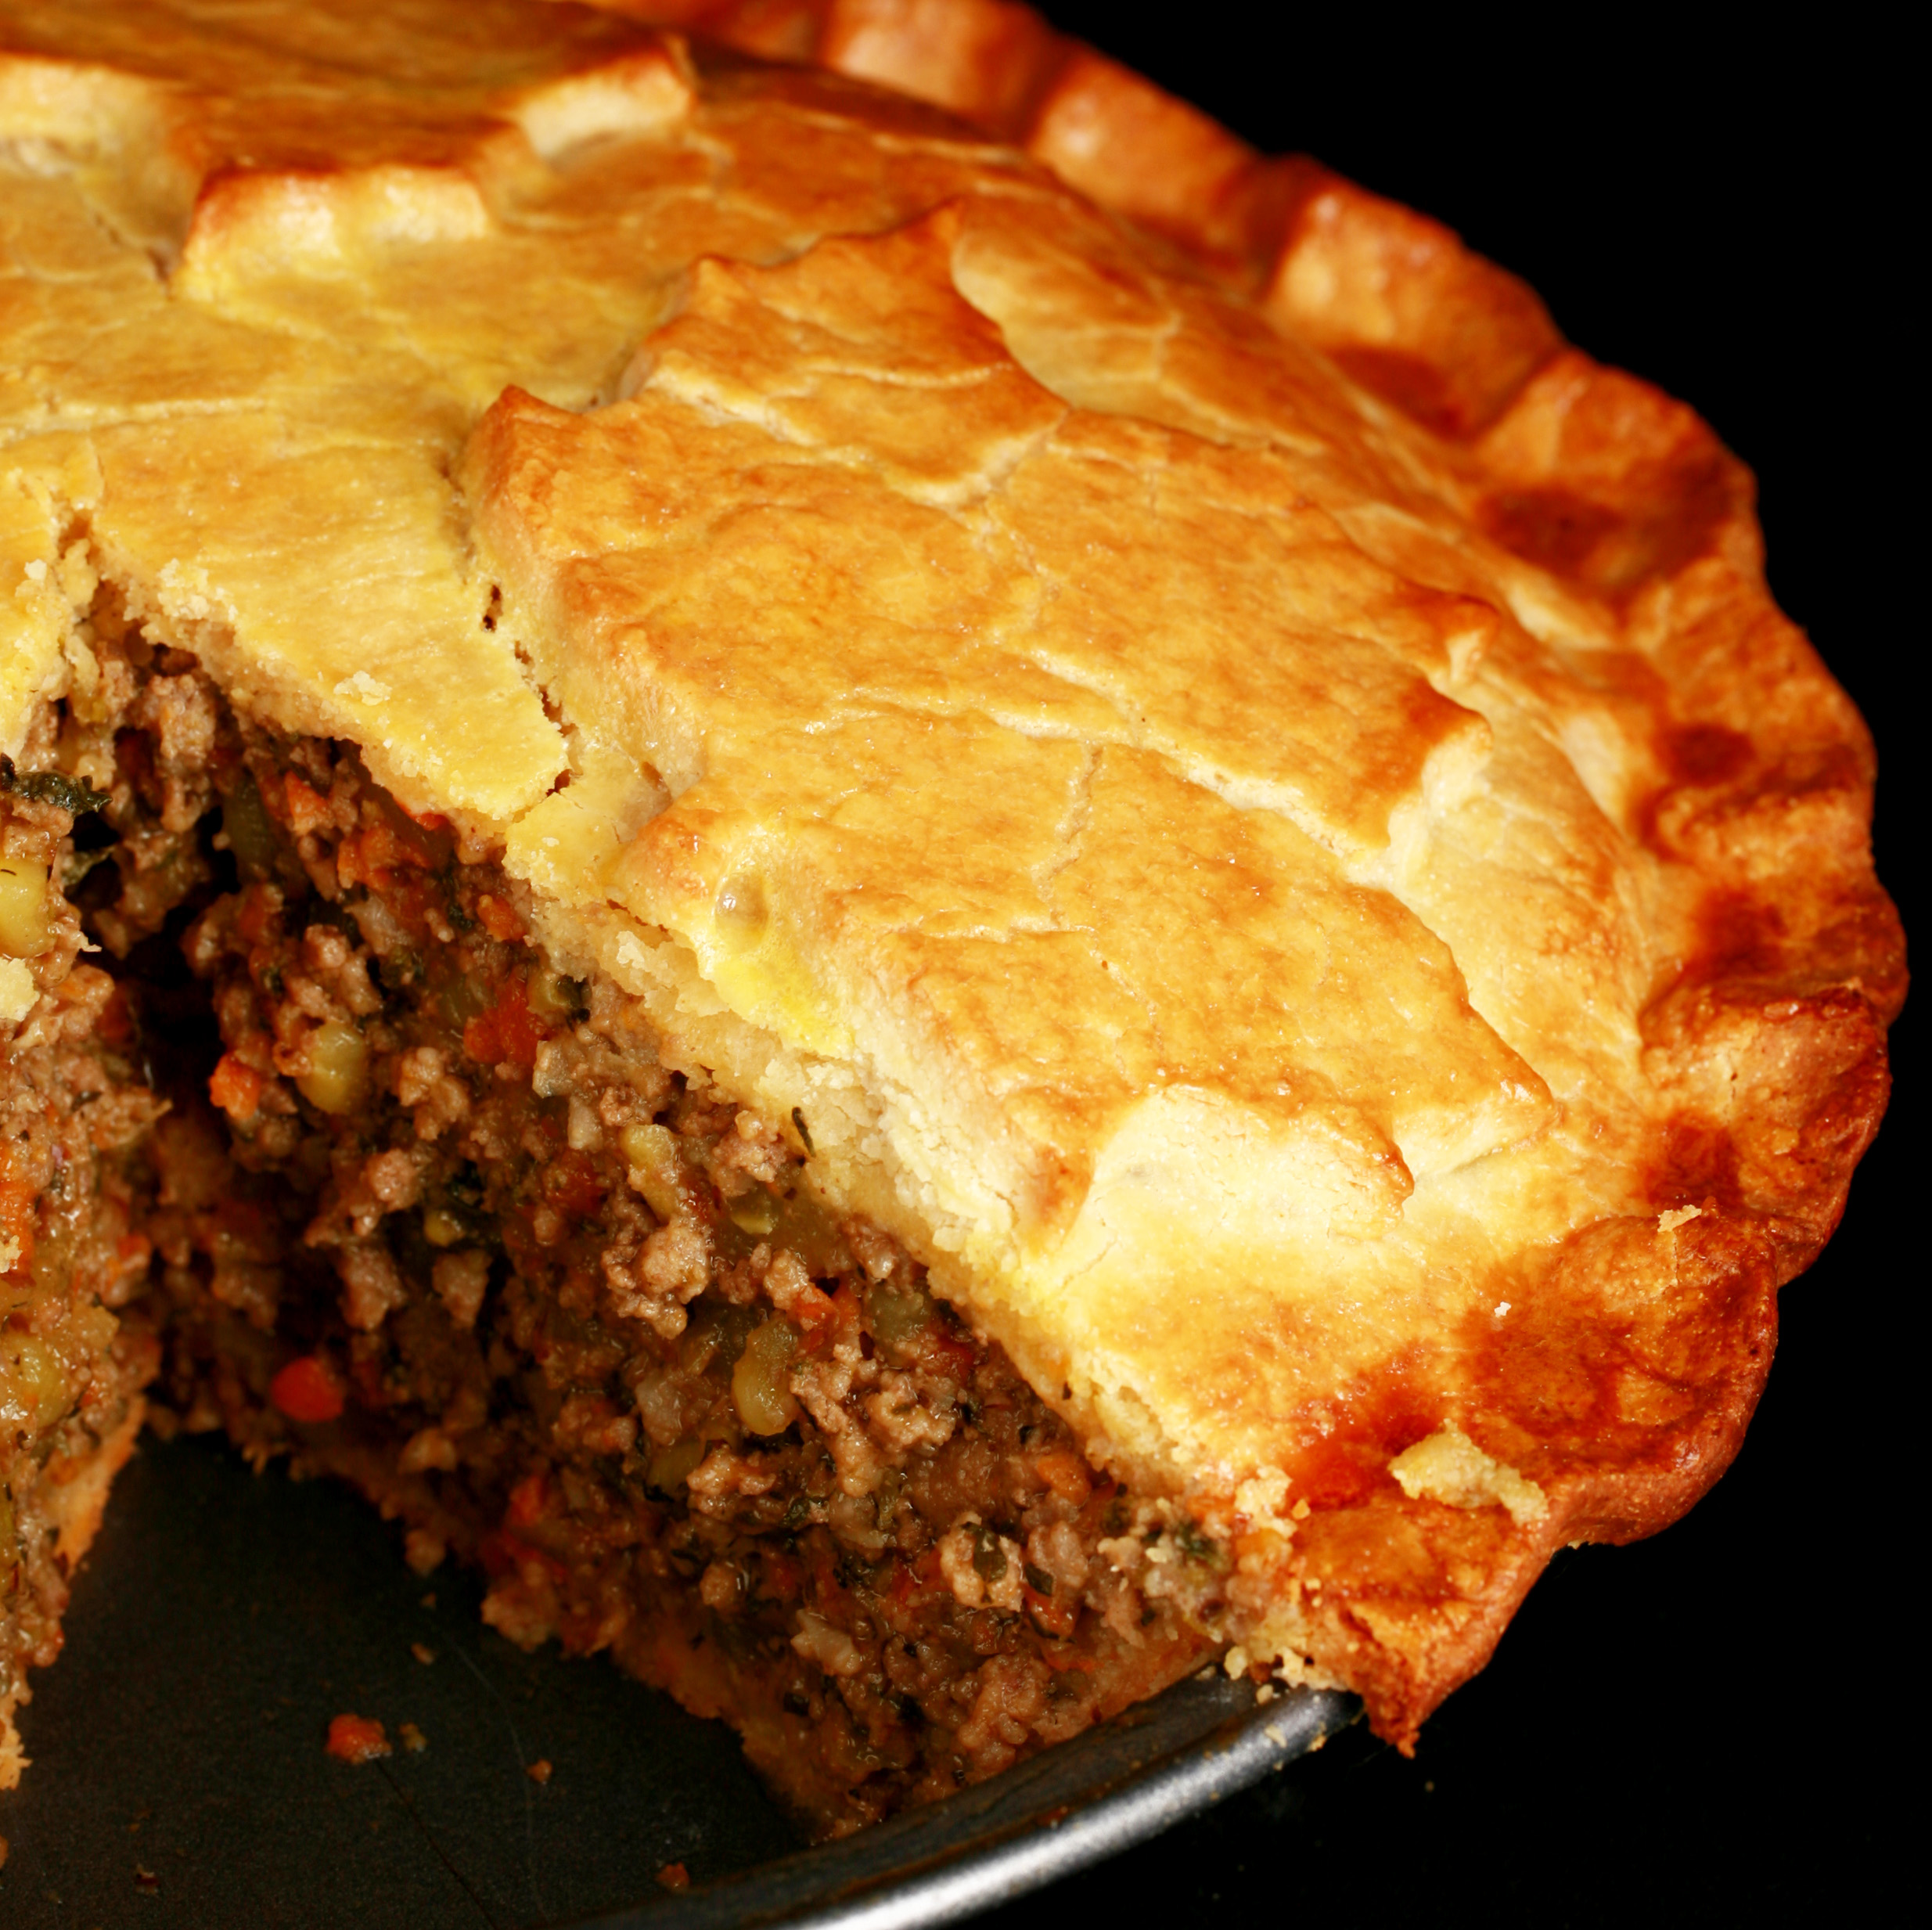 A golden brown gluten-free tourtiere with a maple leaf design on top. There is a section cut out of it, revealing the meat and vegetable filling.